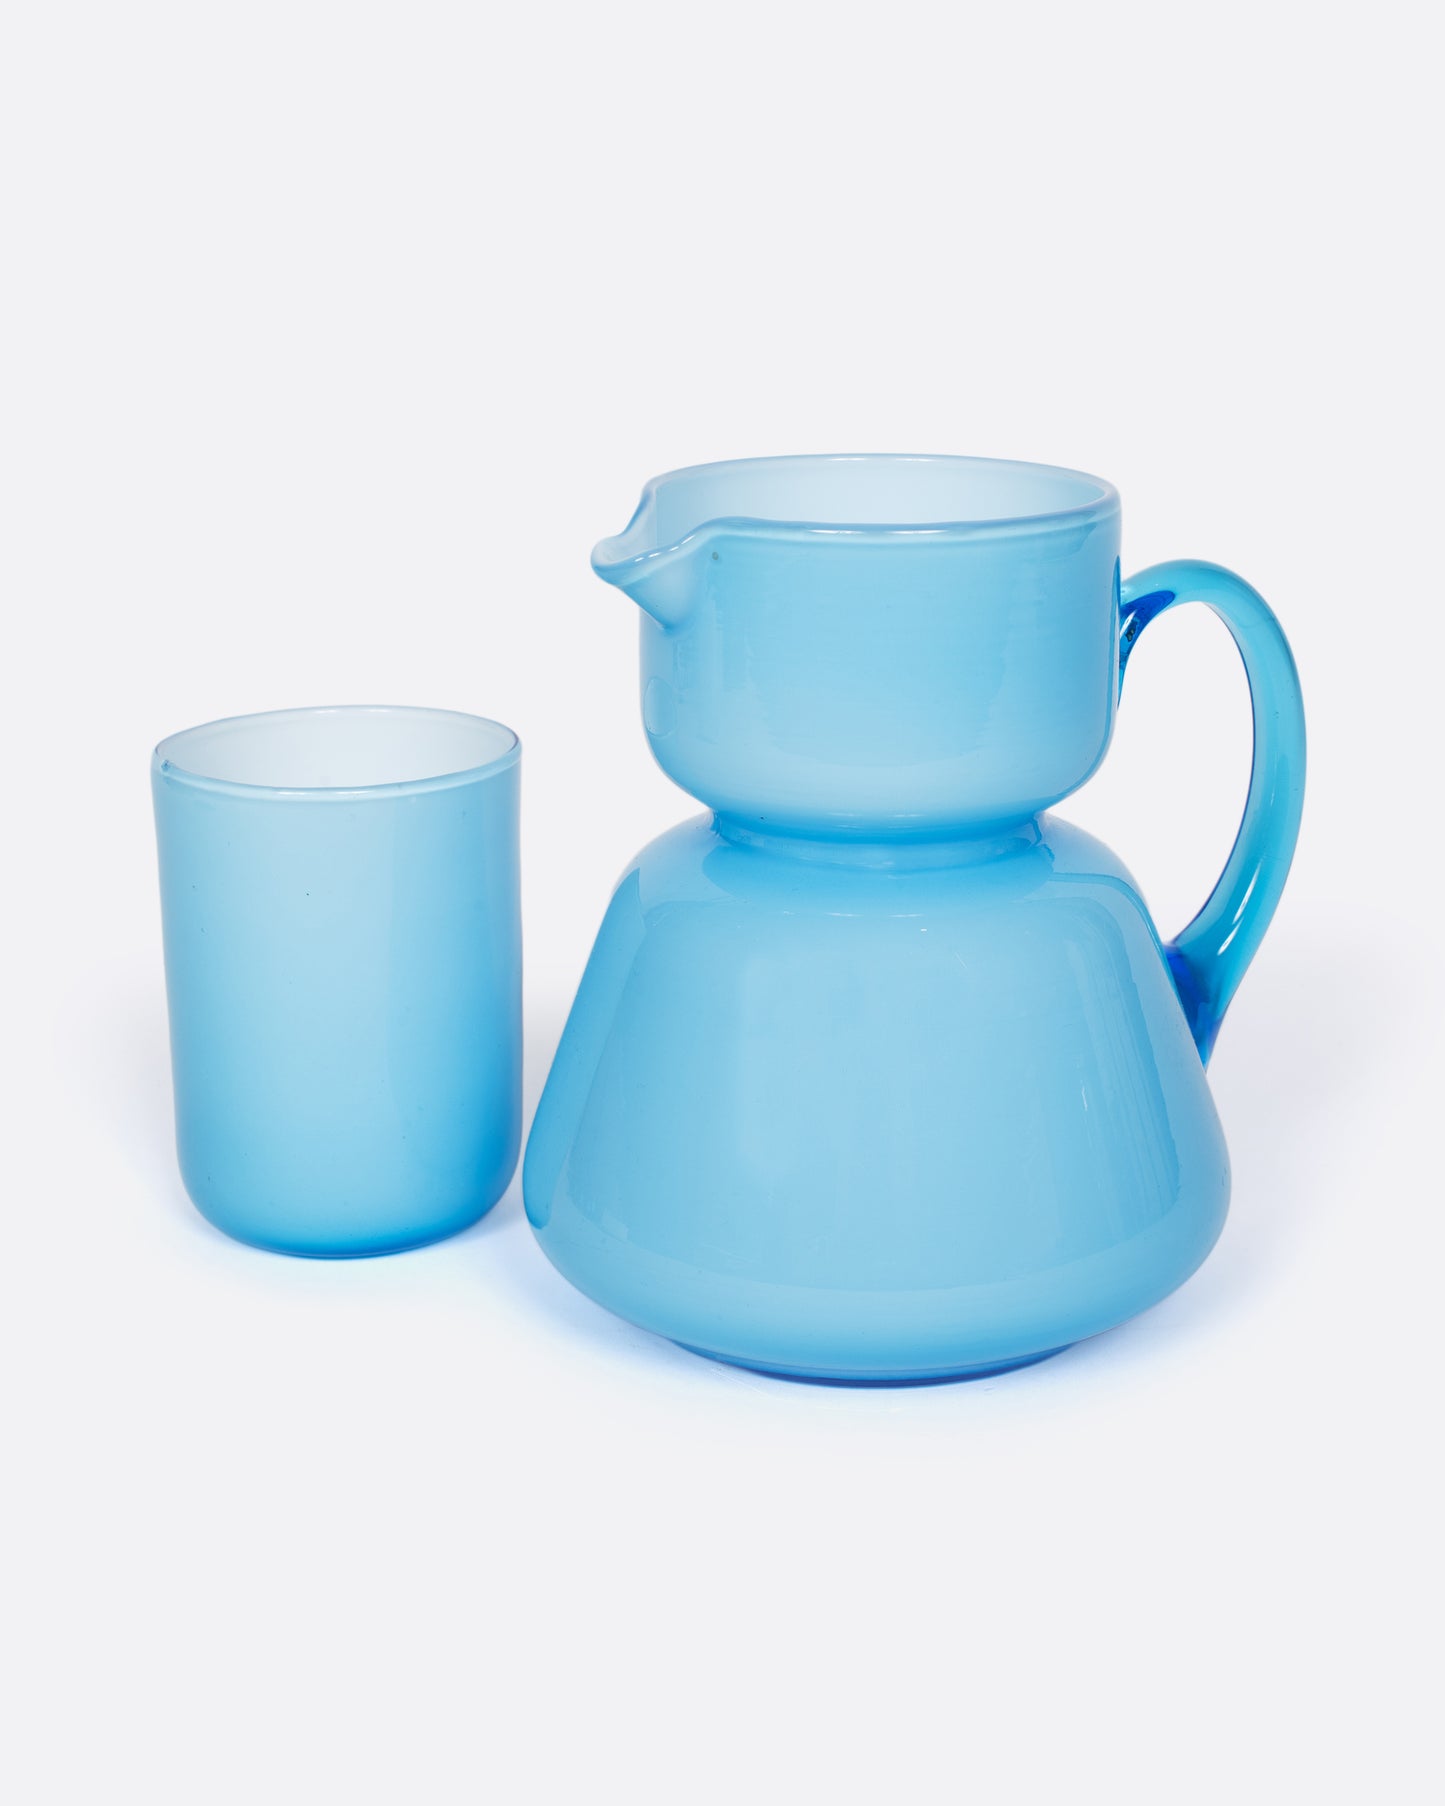 A vintage cased glass cup and creamer with an hourglass shape. Cased glass is made with a layer of white glass underneath creating the velvety, light blue hue.